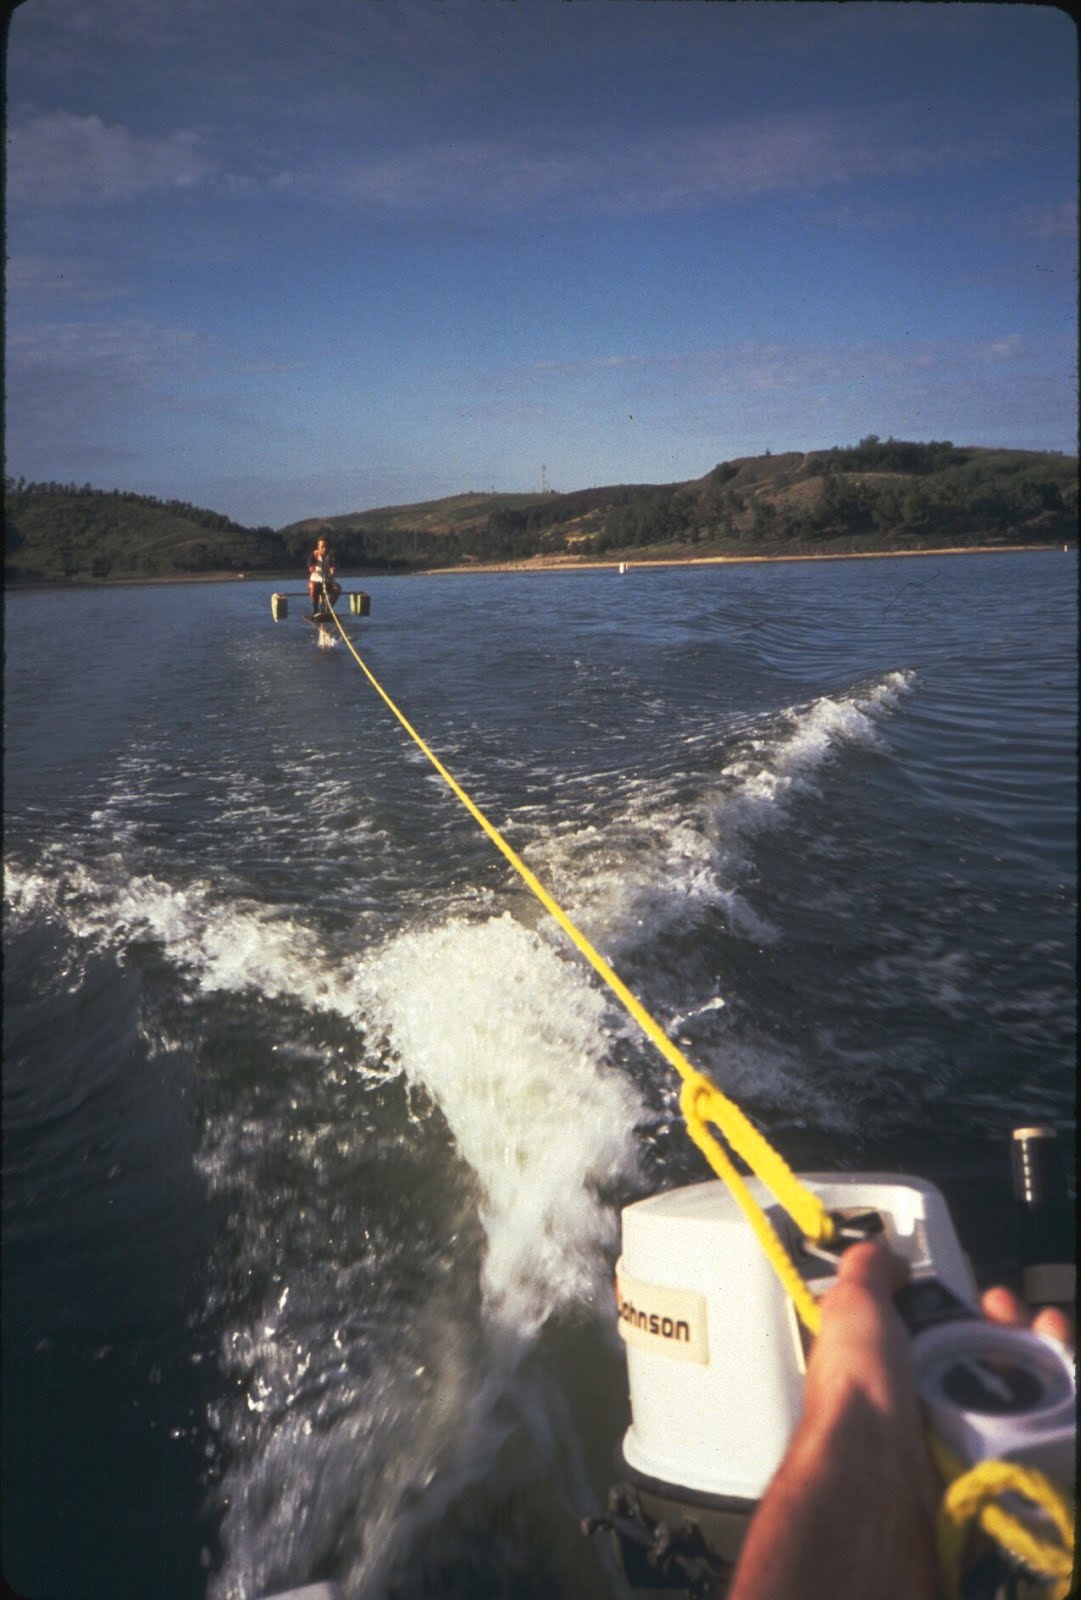 Alec towing and Allan riding the first Flying Fish configuration